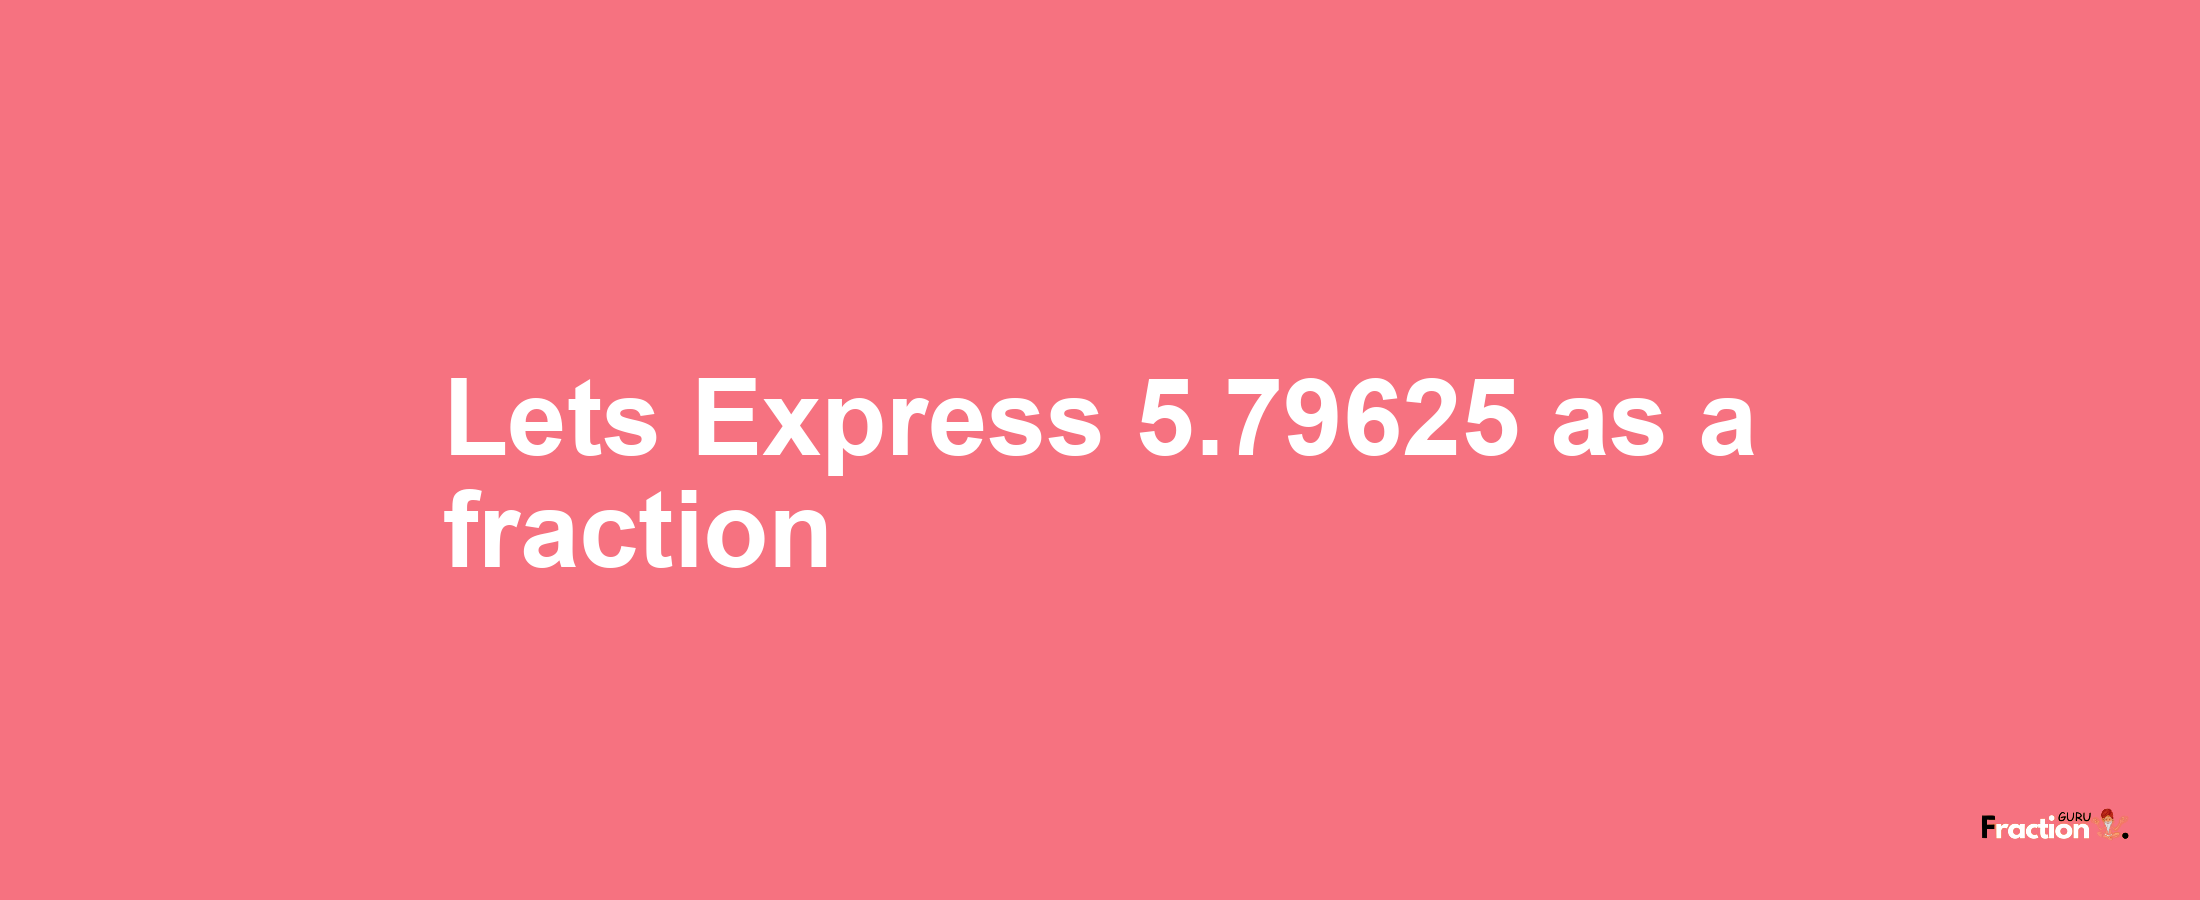 Lets Express 5.79625 as afraction